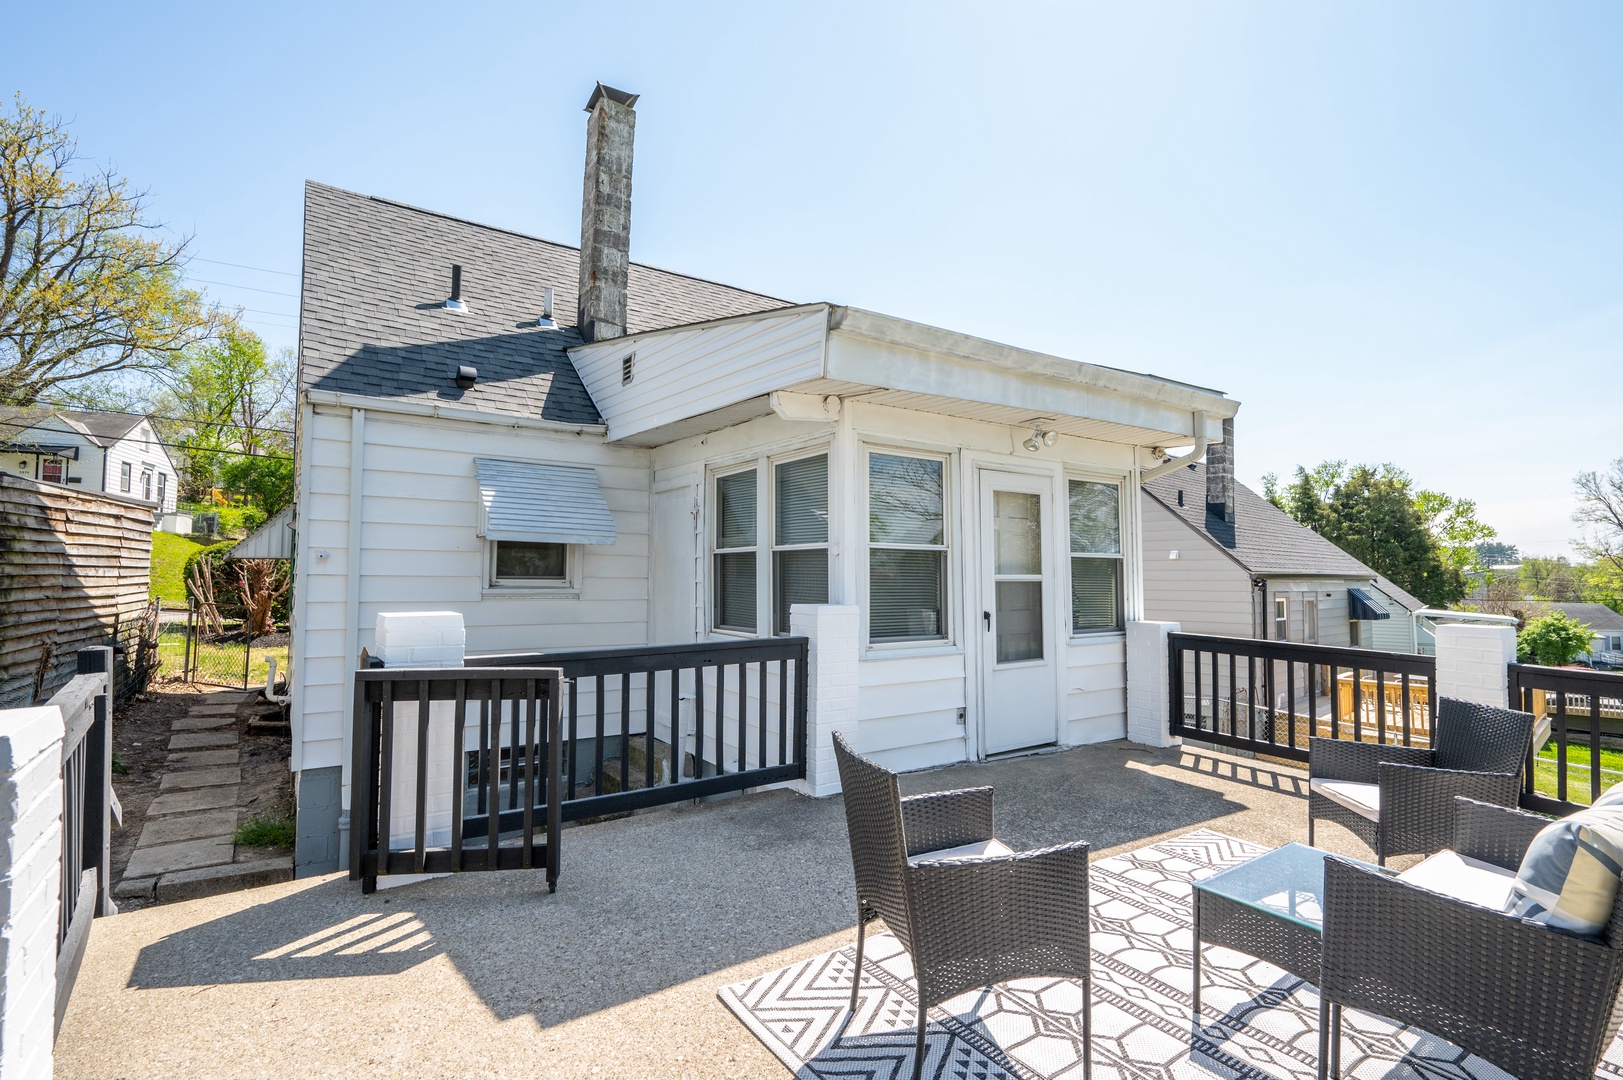 Enjoy the fresh air and sunshine on the Back Deck, with outdoor seating available for 4